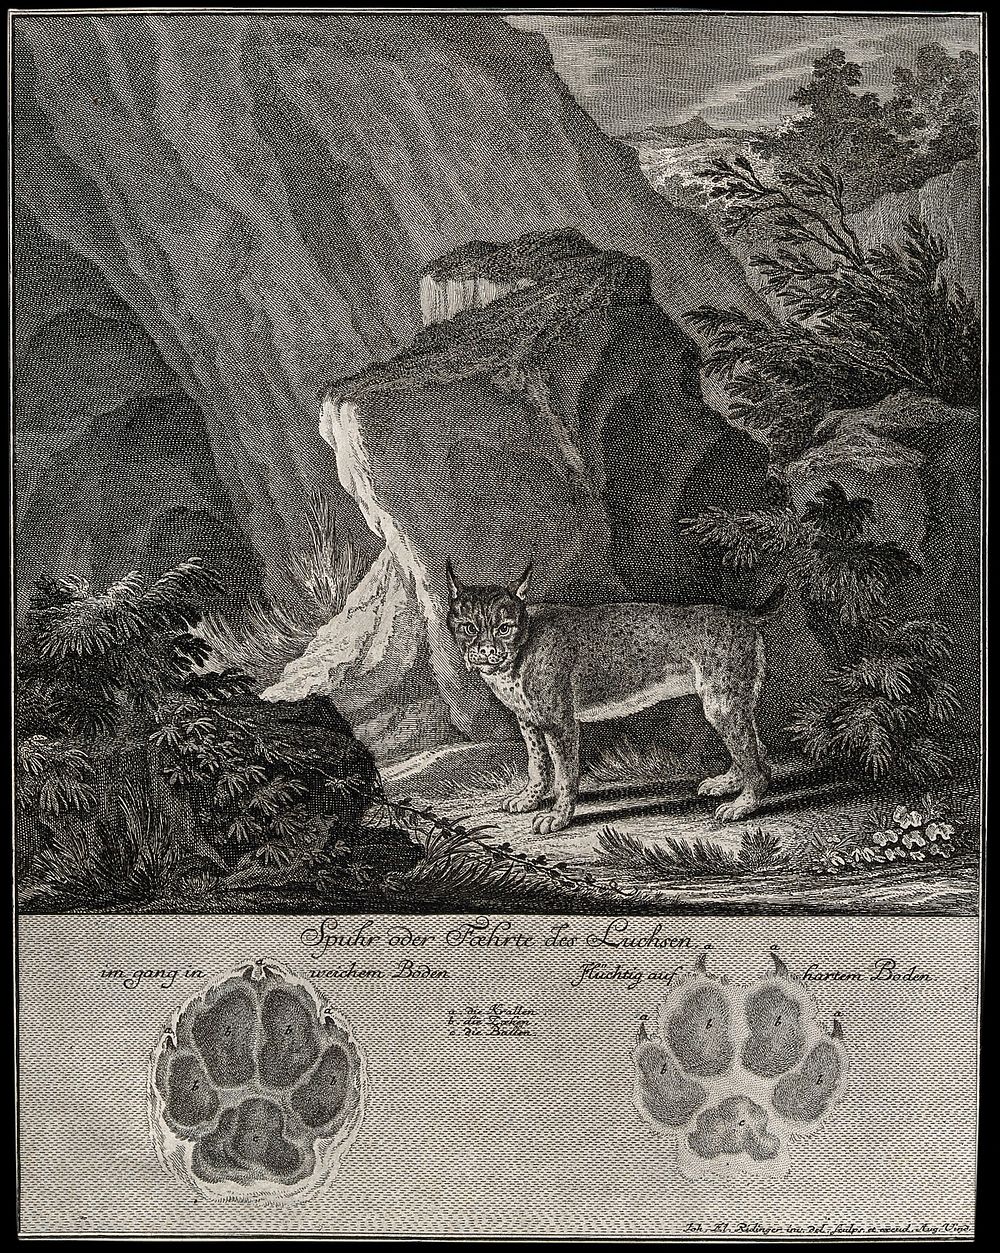 Above, a lynx standing in front of a large rock in a mountainous landscape, below, its track. Etching by J. E. Ridinger.